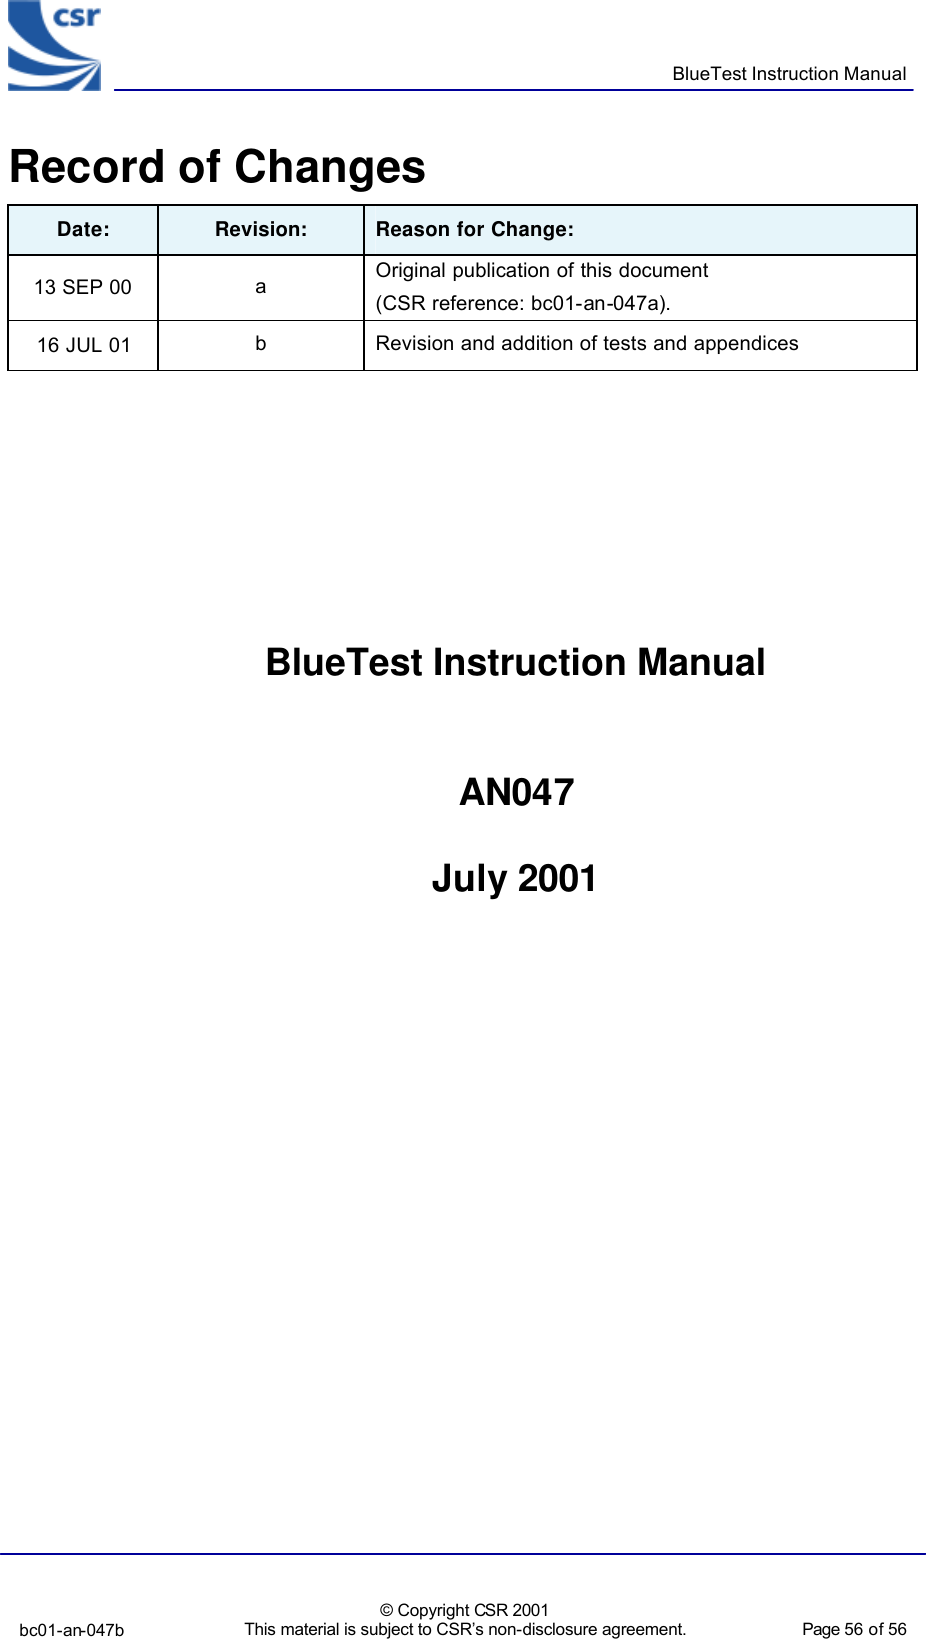      BlueTest Instruction Manual  bc01-an-047b  © Copyright CSR 2001 This material is subject to CSR’s non-disclosure agreement.   Page 56 of 56  BlueCoreTM01 Record of Changes Date: Revision: Reason for Change: 13 SEP 00 a Original publication of this document (CSR reference: bc01-an-047a). 16 JUL 01 b Revision and addition of tests and appendices          BlueTest Instruction Manual   AN047  July 2001        